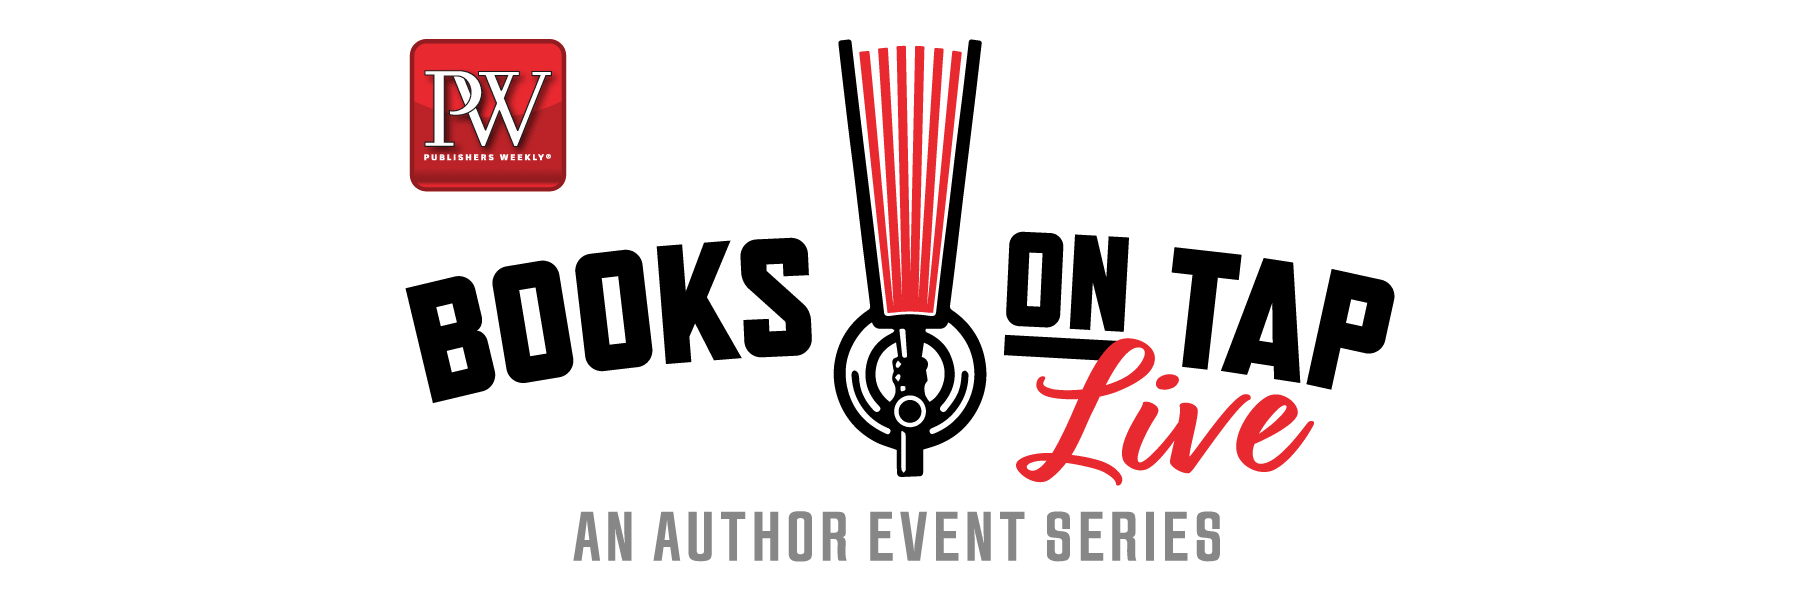 Books on Tap Live